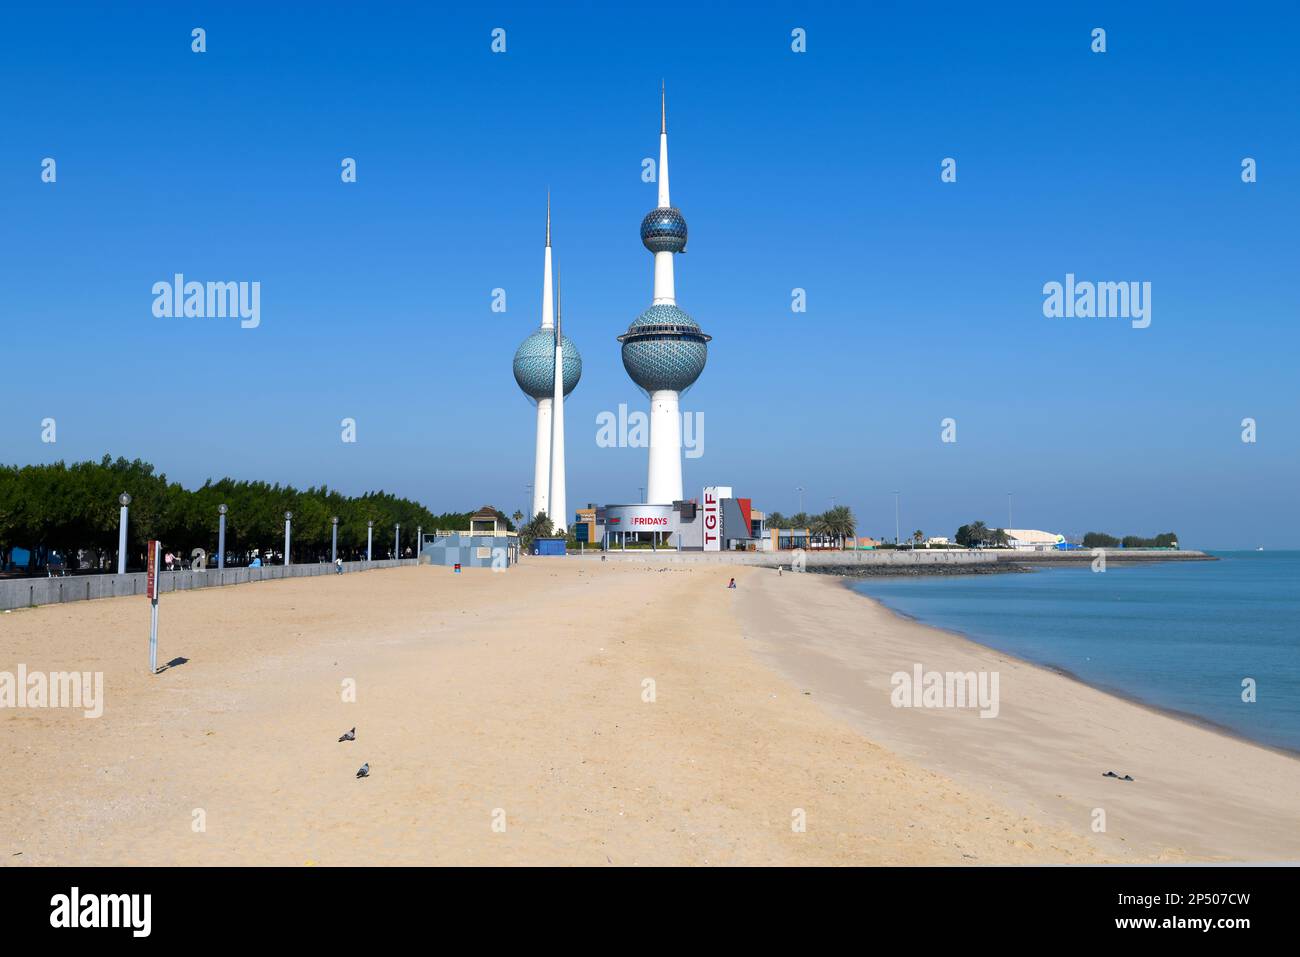 Kuwait Towers and Dasman Beach in Kuwait City. Construction also know as Kuwait Water Towers and became landmark and symbol of modern Kuwait. Stock Photo